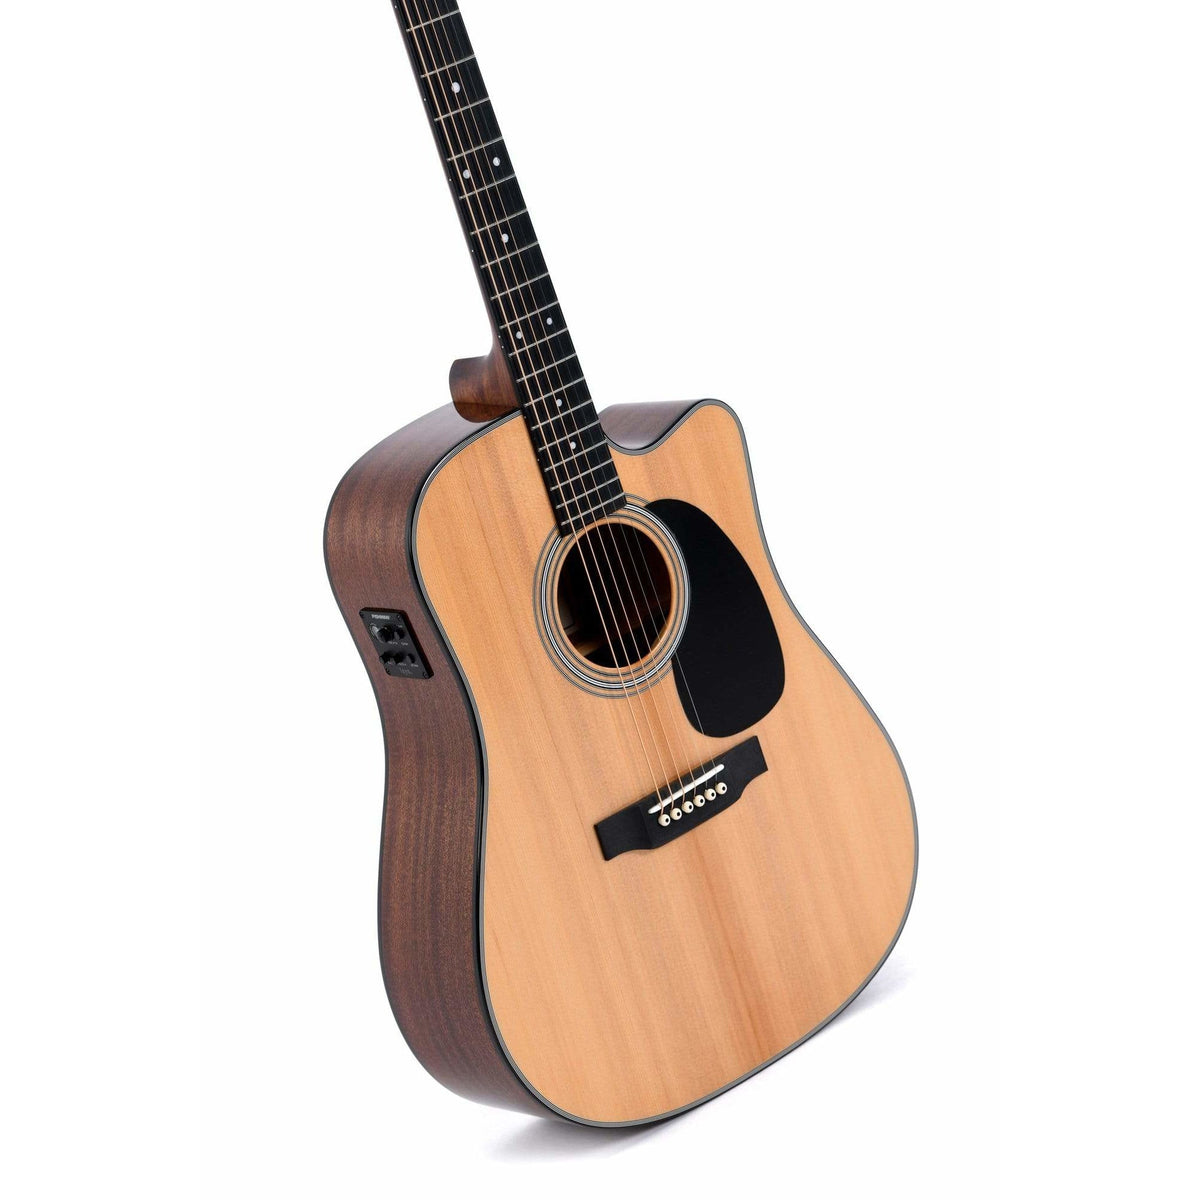 Sigma Guitar Sigma Acoustic Guitar Dreadnought Solid Spruce Top with Pickup DMC-1E - Byron Music